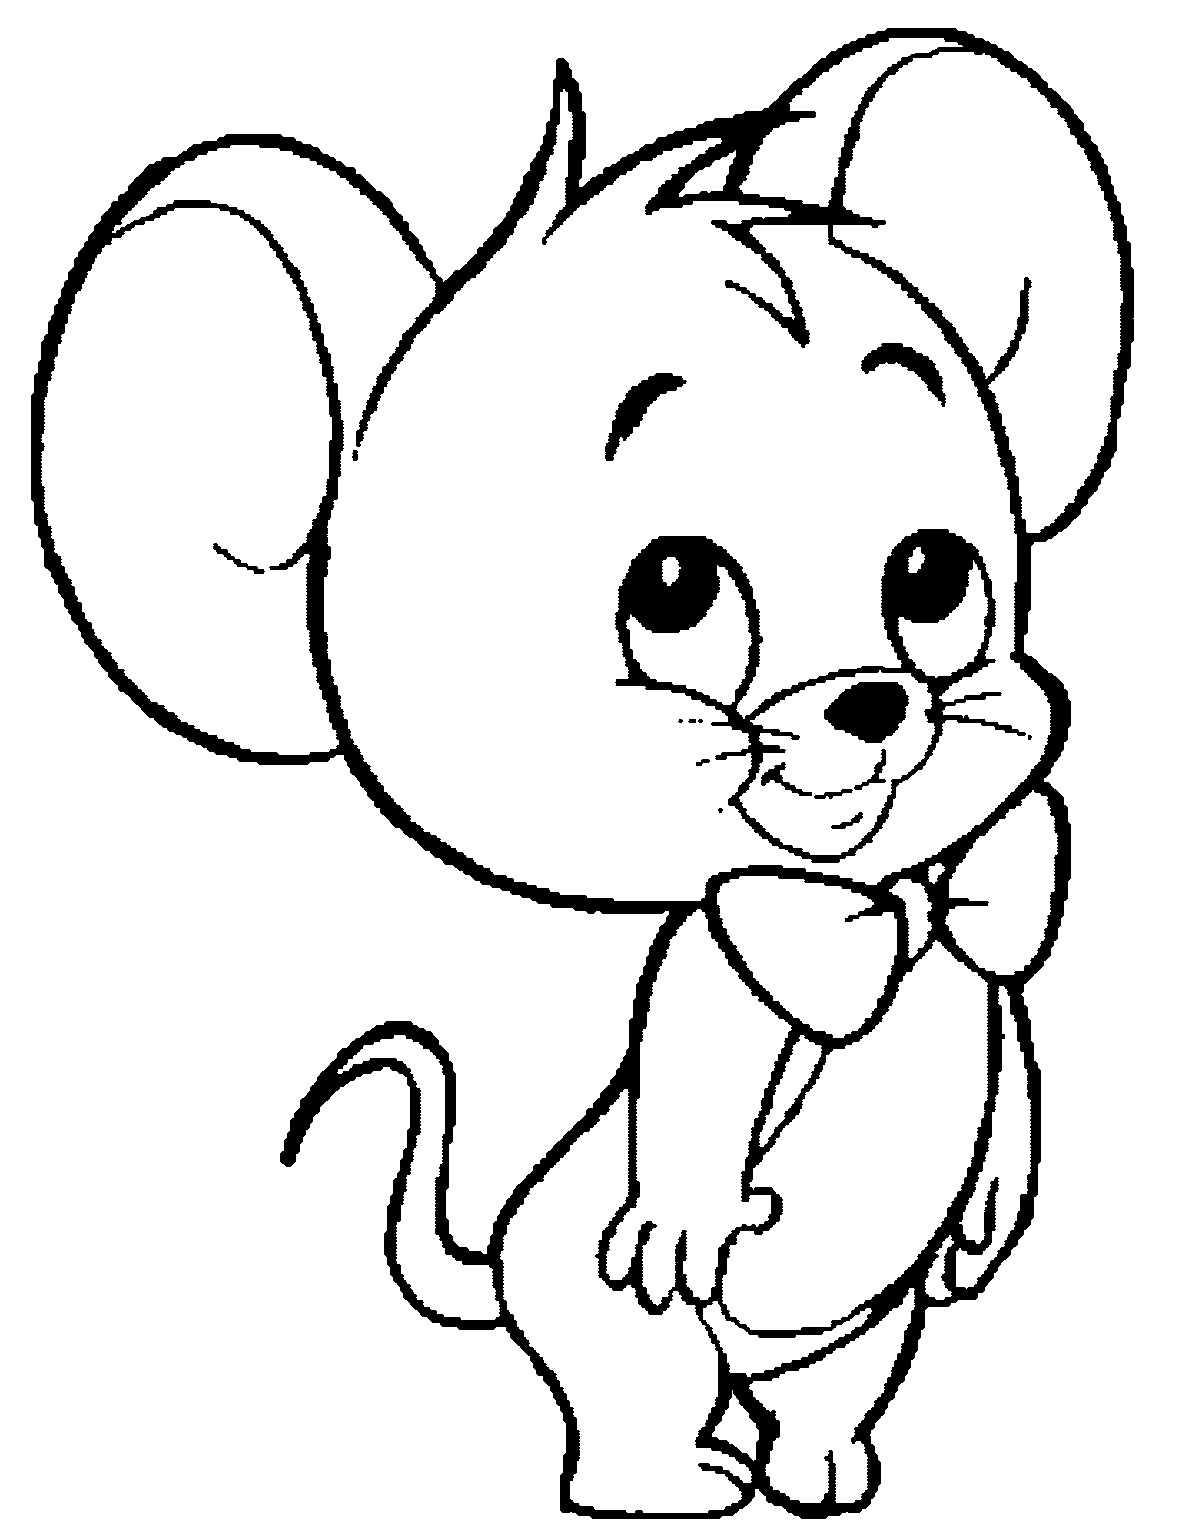 Mouse Coloring Page WeColoringPage 45 | Wecoloringpage